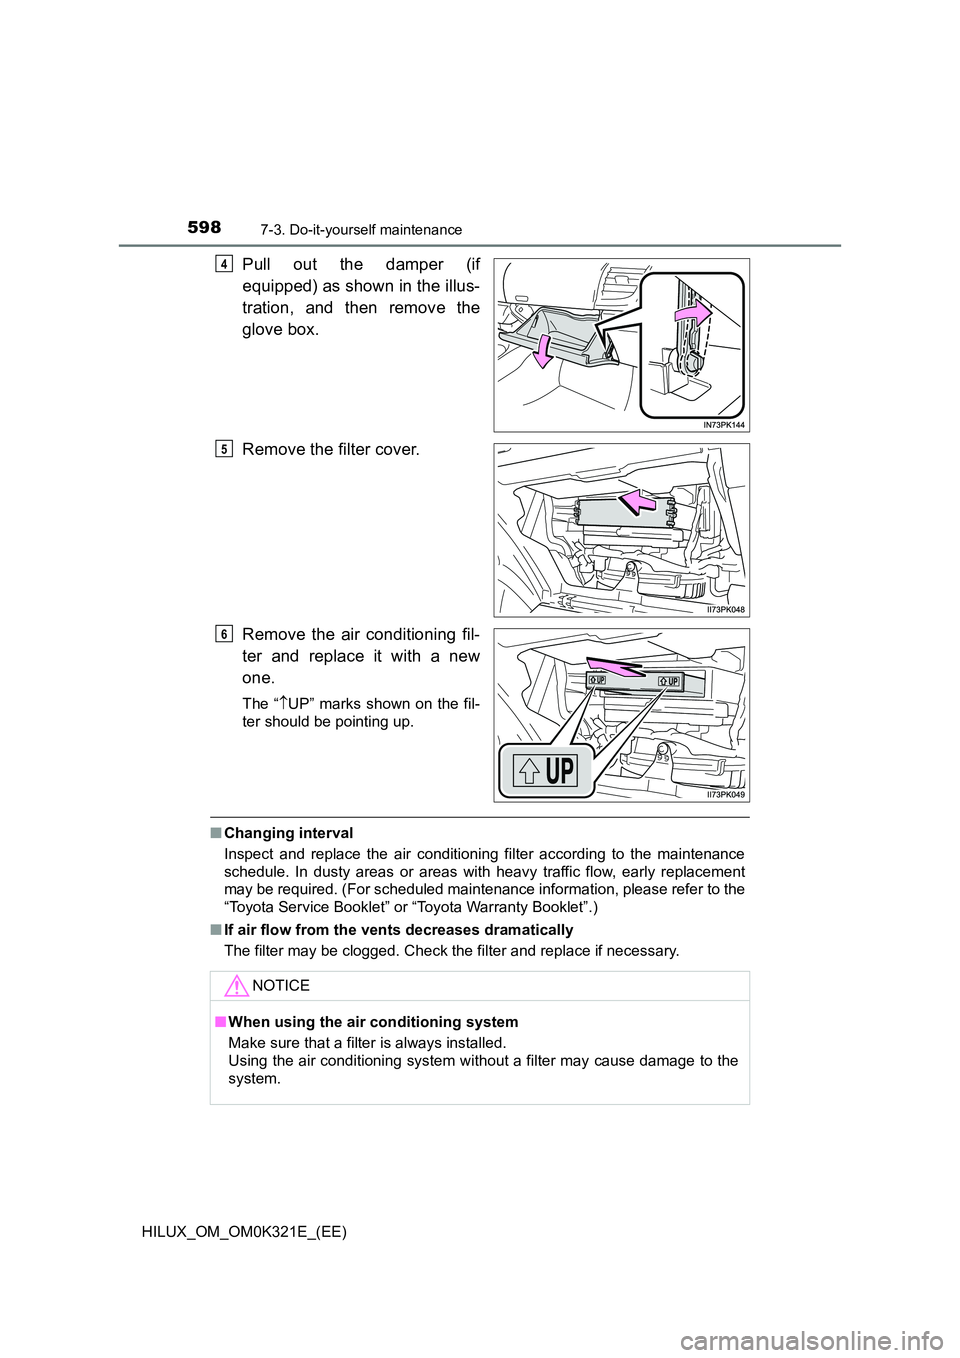 TOYOTA HILUX 2020  Owners Manual (in English) 5987-3. Do-it-yourself maintenance
HILUX_OM_OM0K321E_(EE)
Pull out the damper (if 
equipped) as shown in the illus- 
tration, and then remove the 
glove box. 
Remove the filter cover. 
Remove the air 